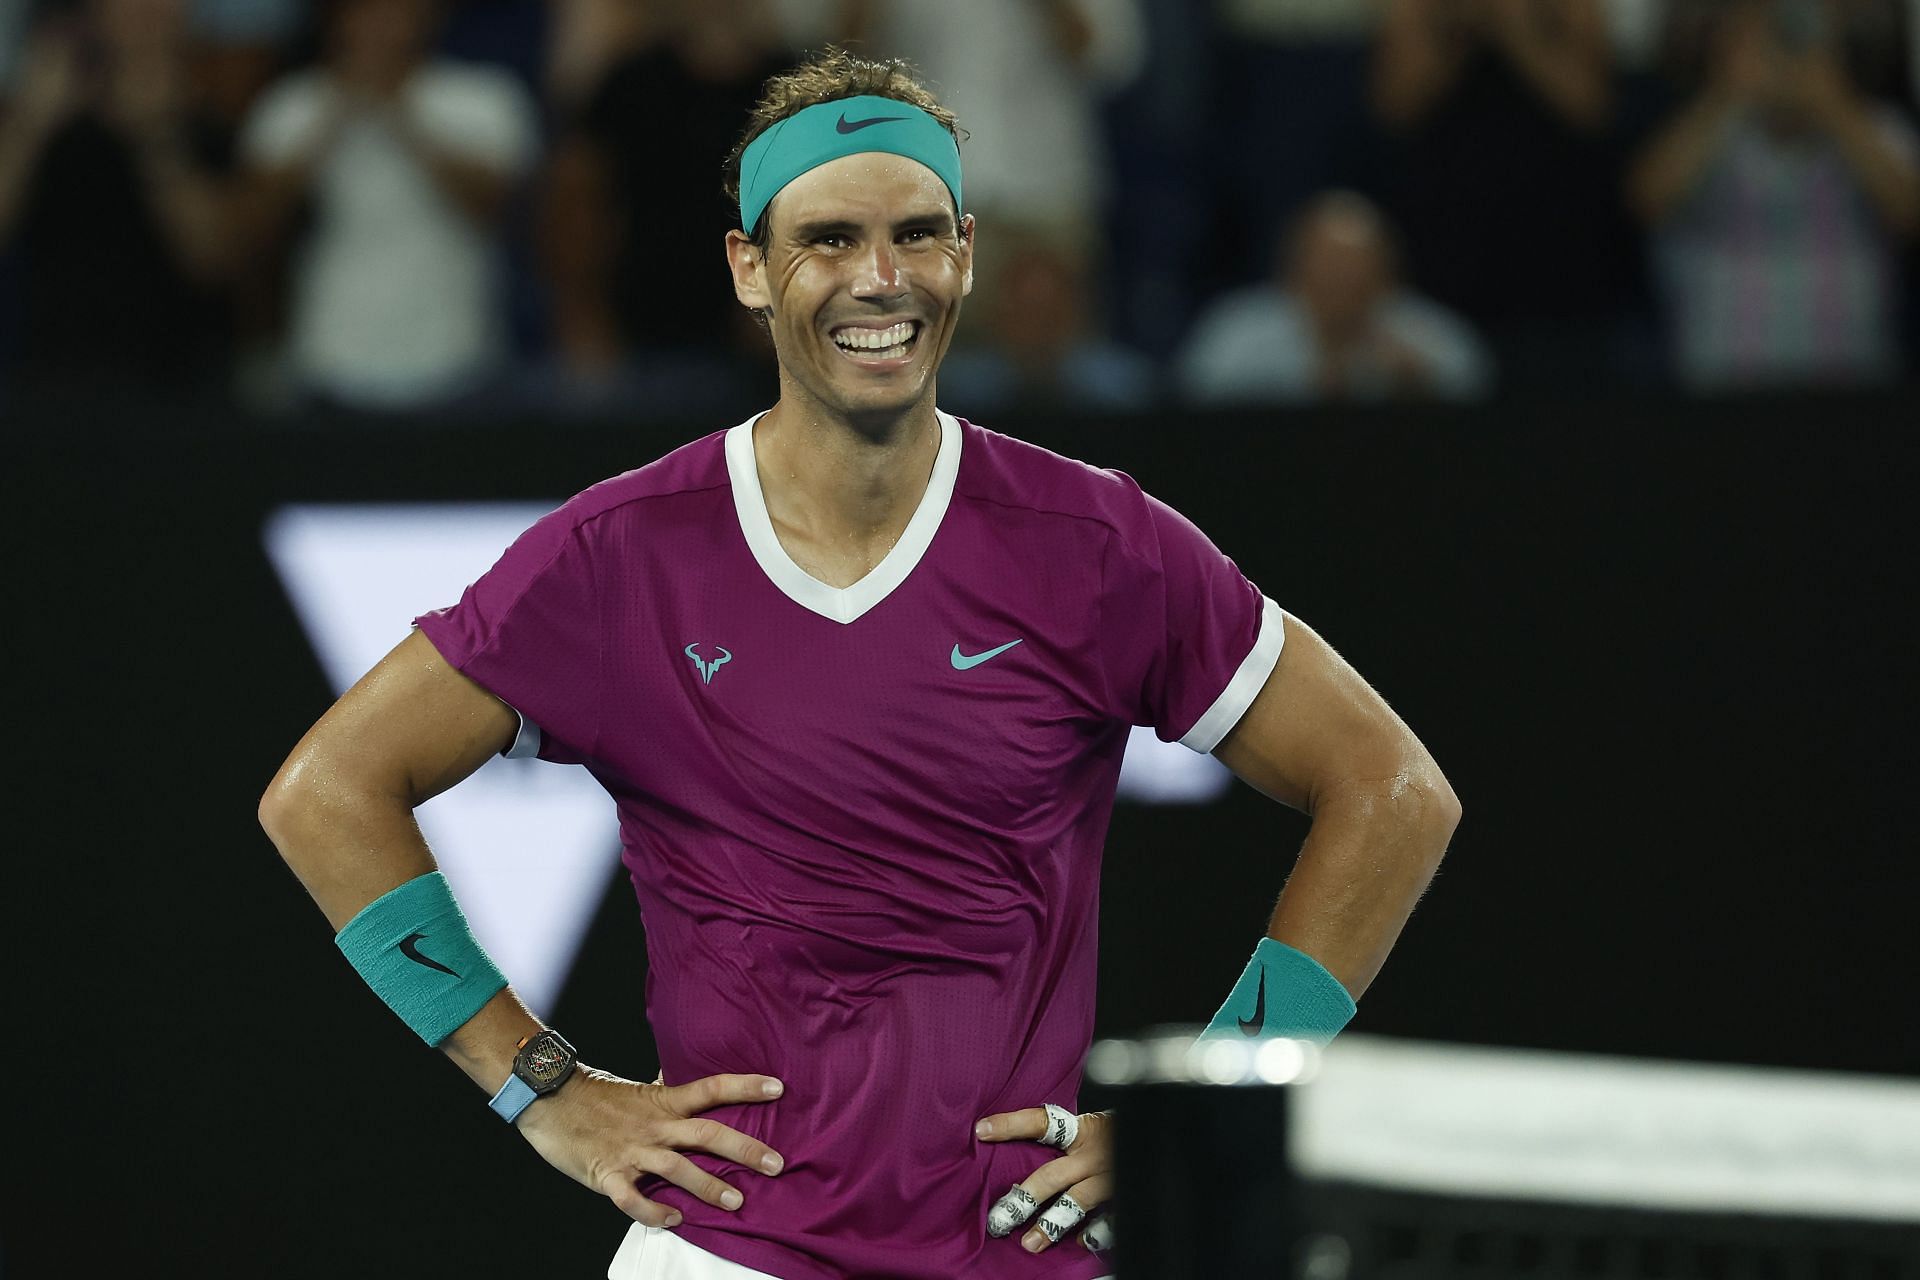 Records achieved by Rafael Nadal at the 2022 Australian Open